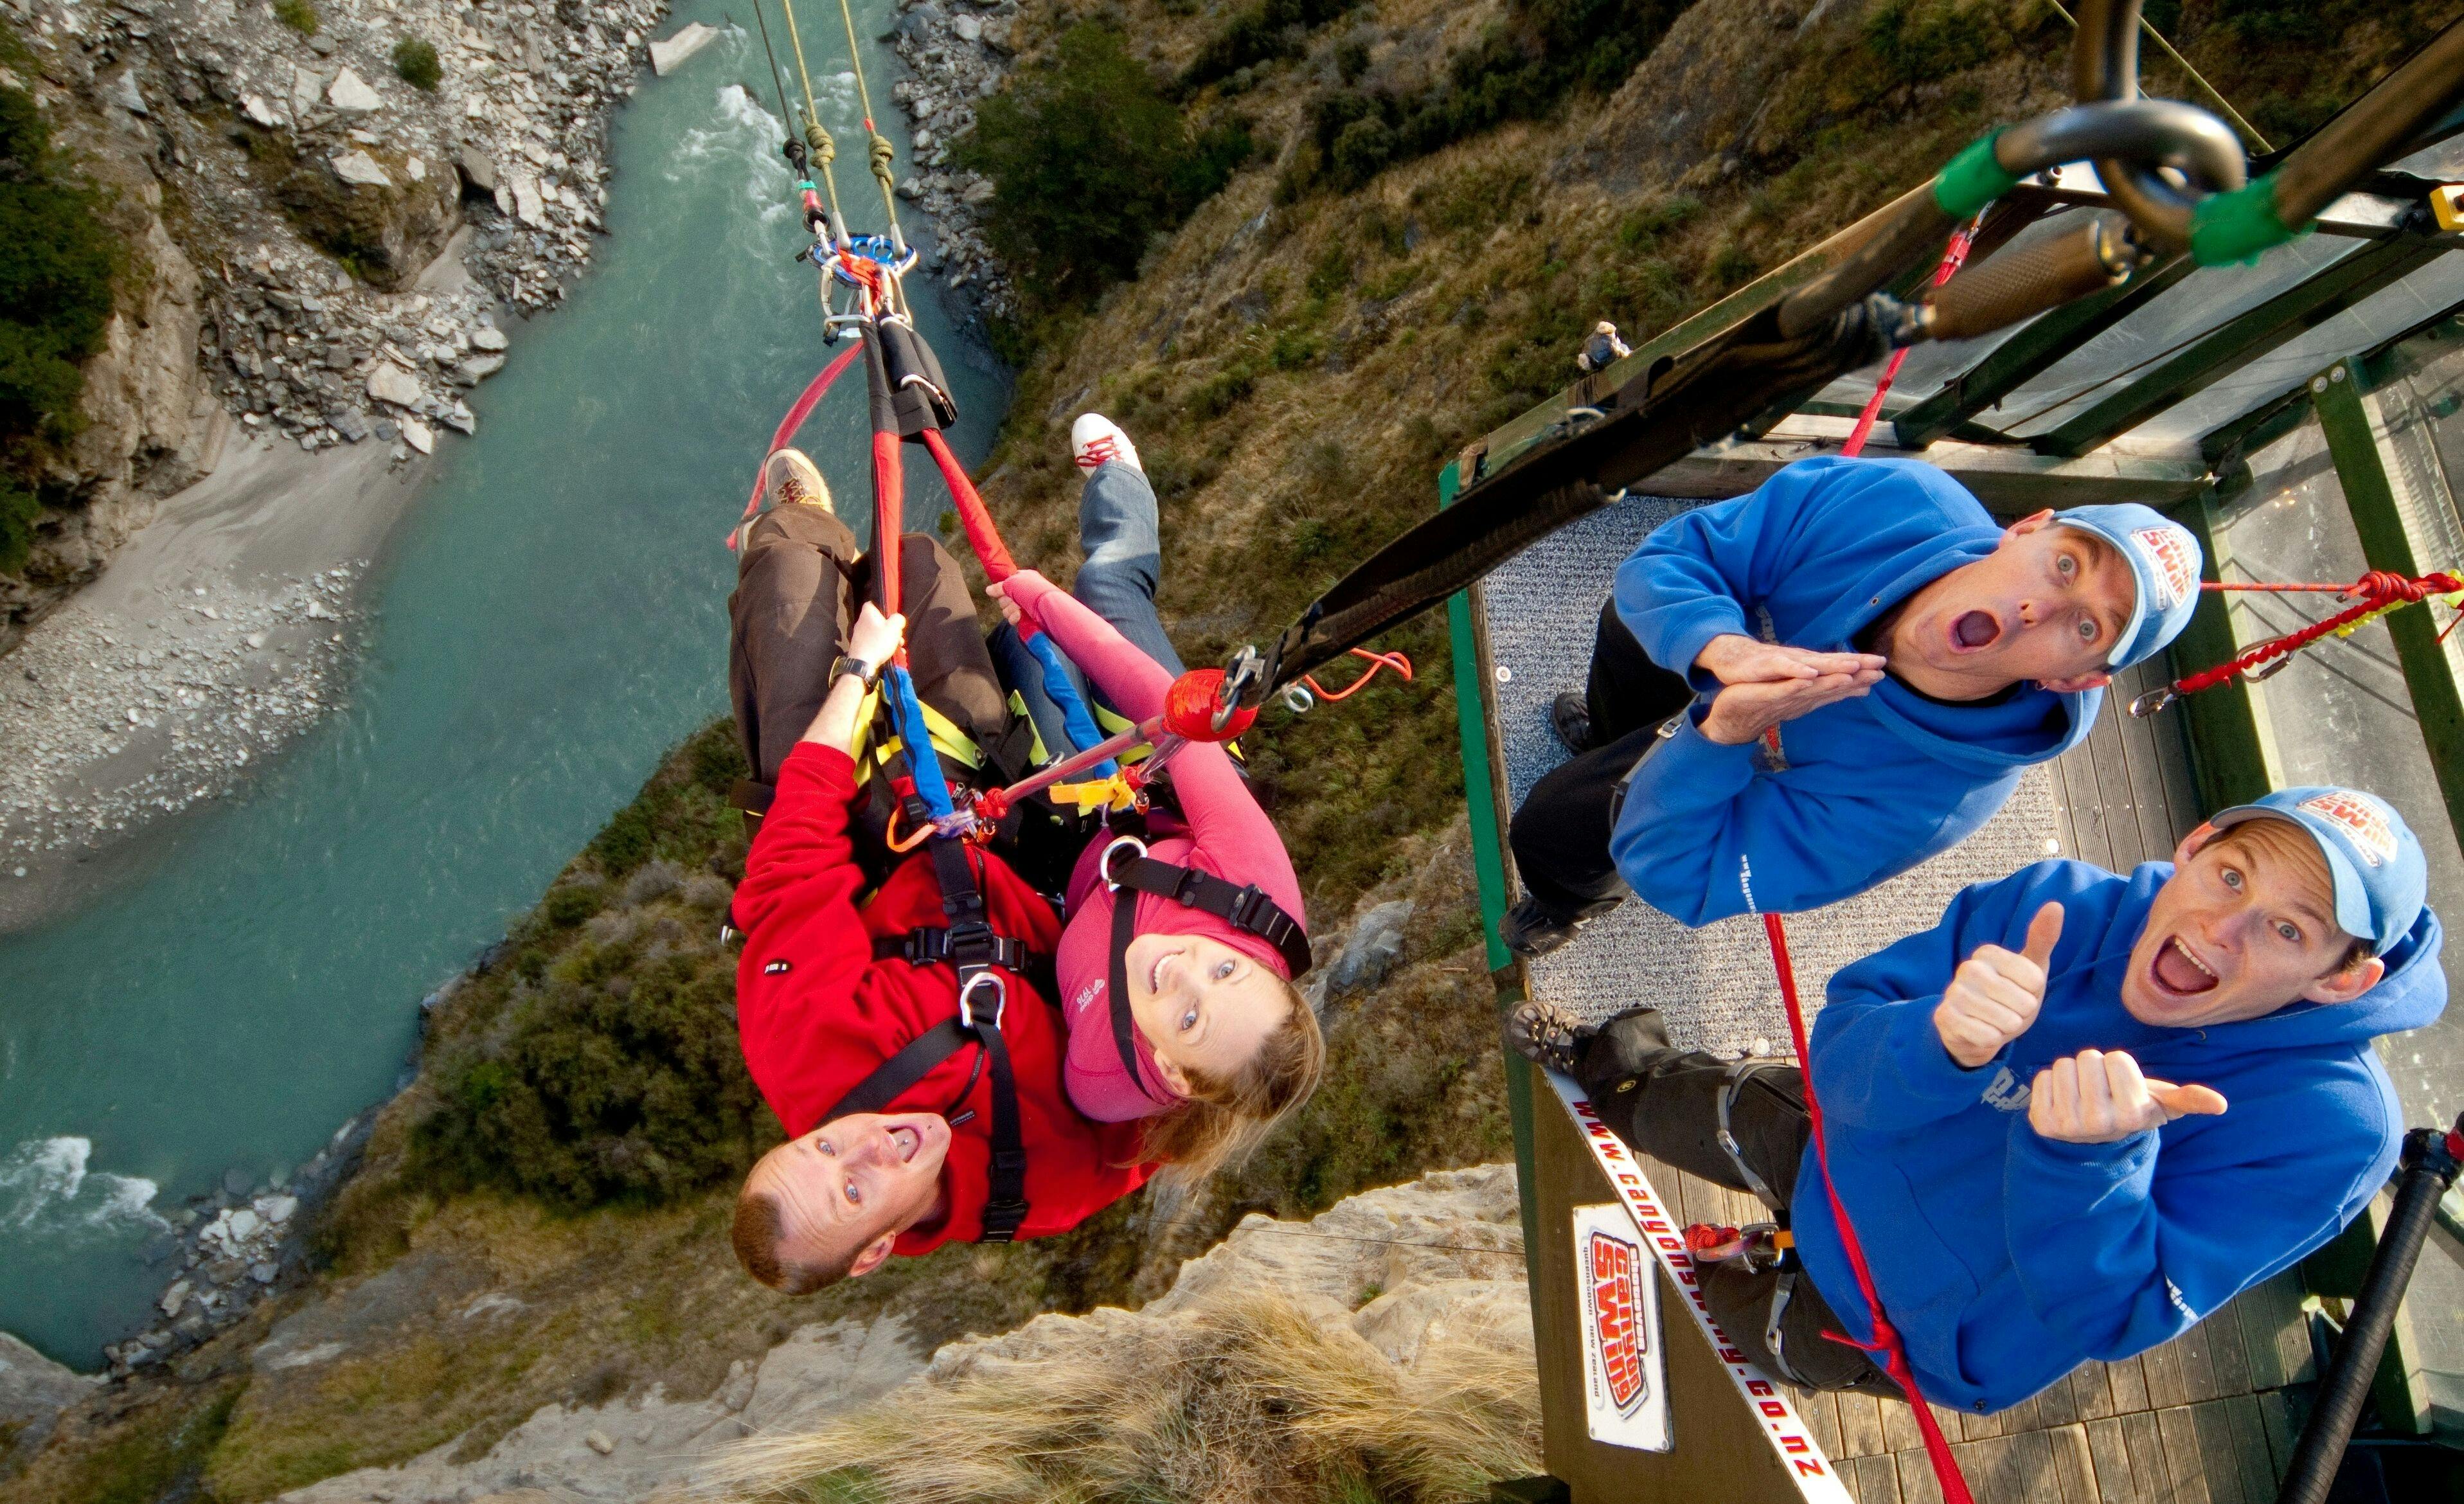 Couple Doing Tandem Jump With Shotover Canyon Swing